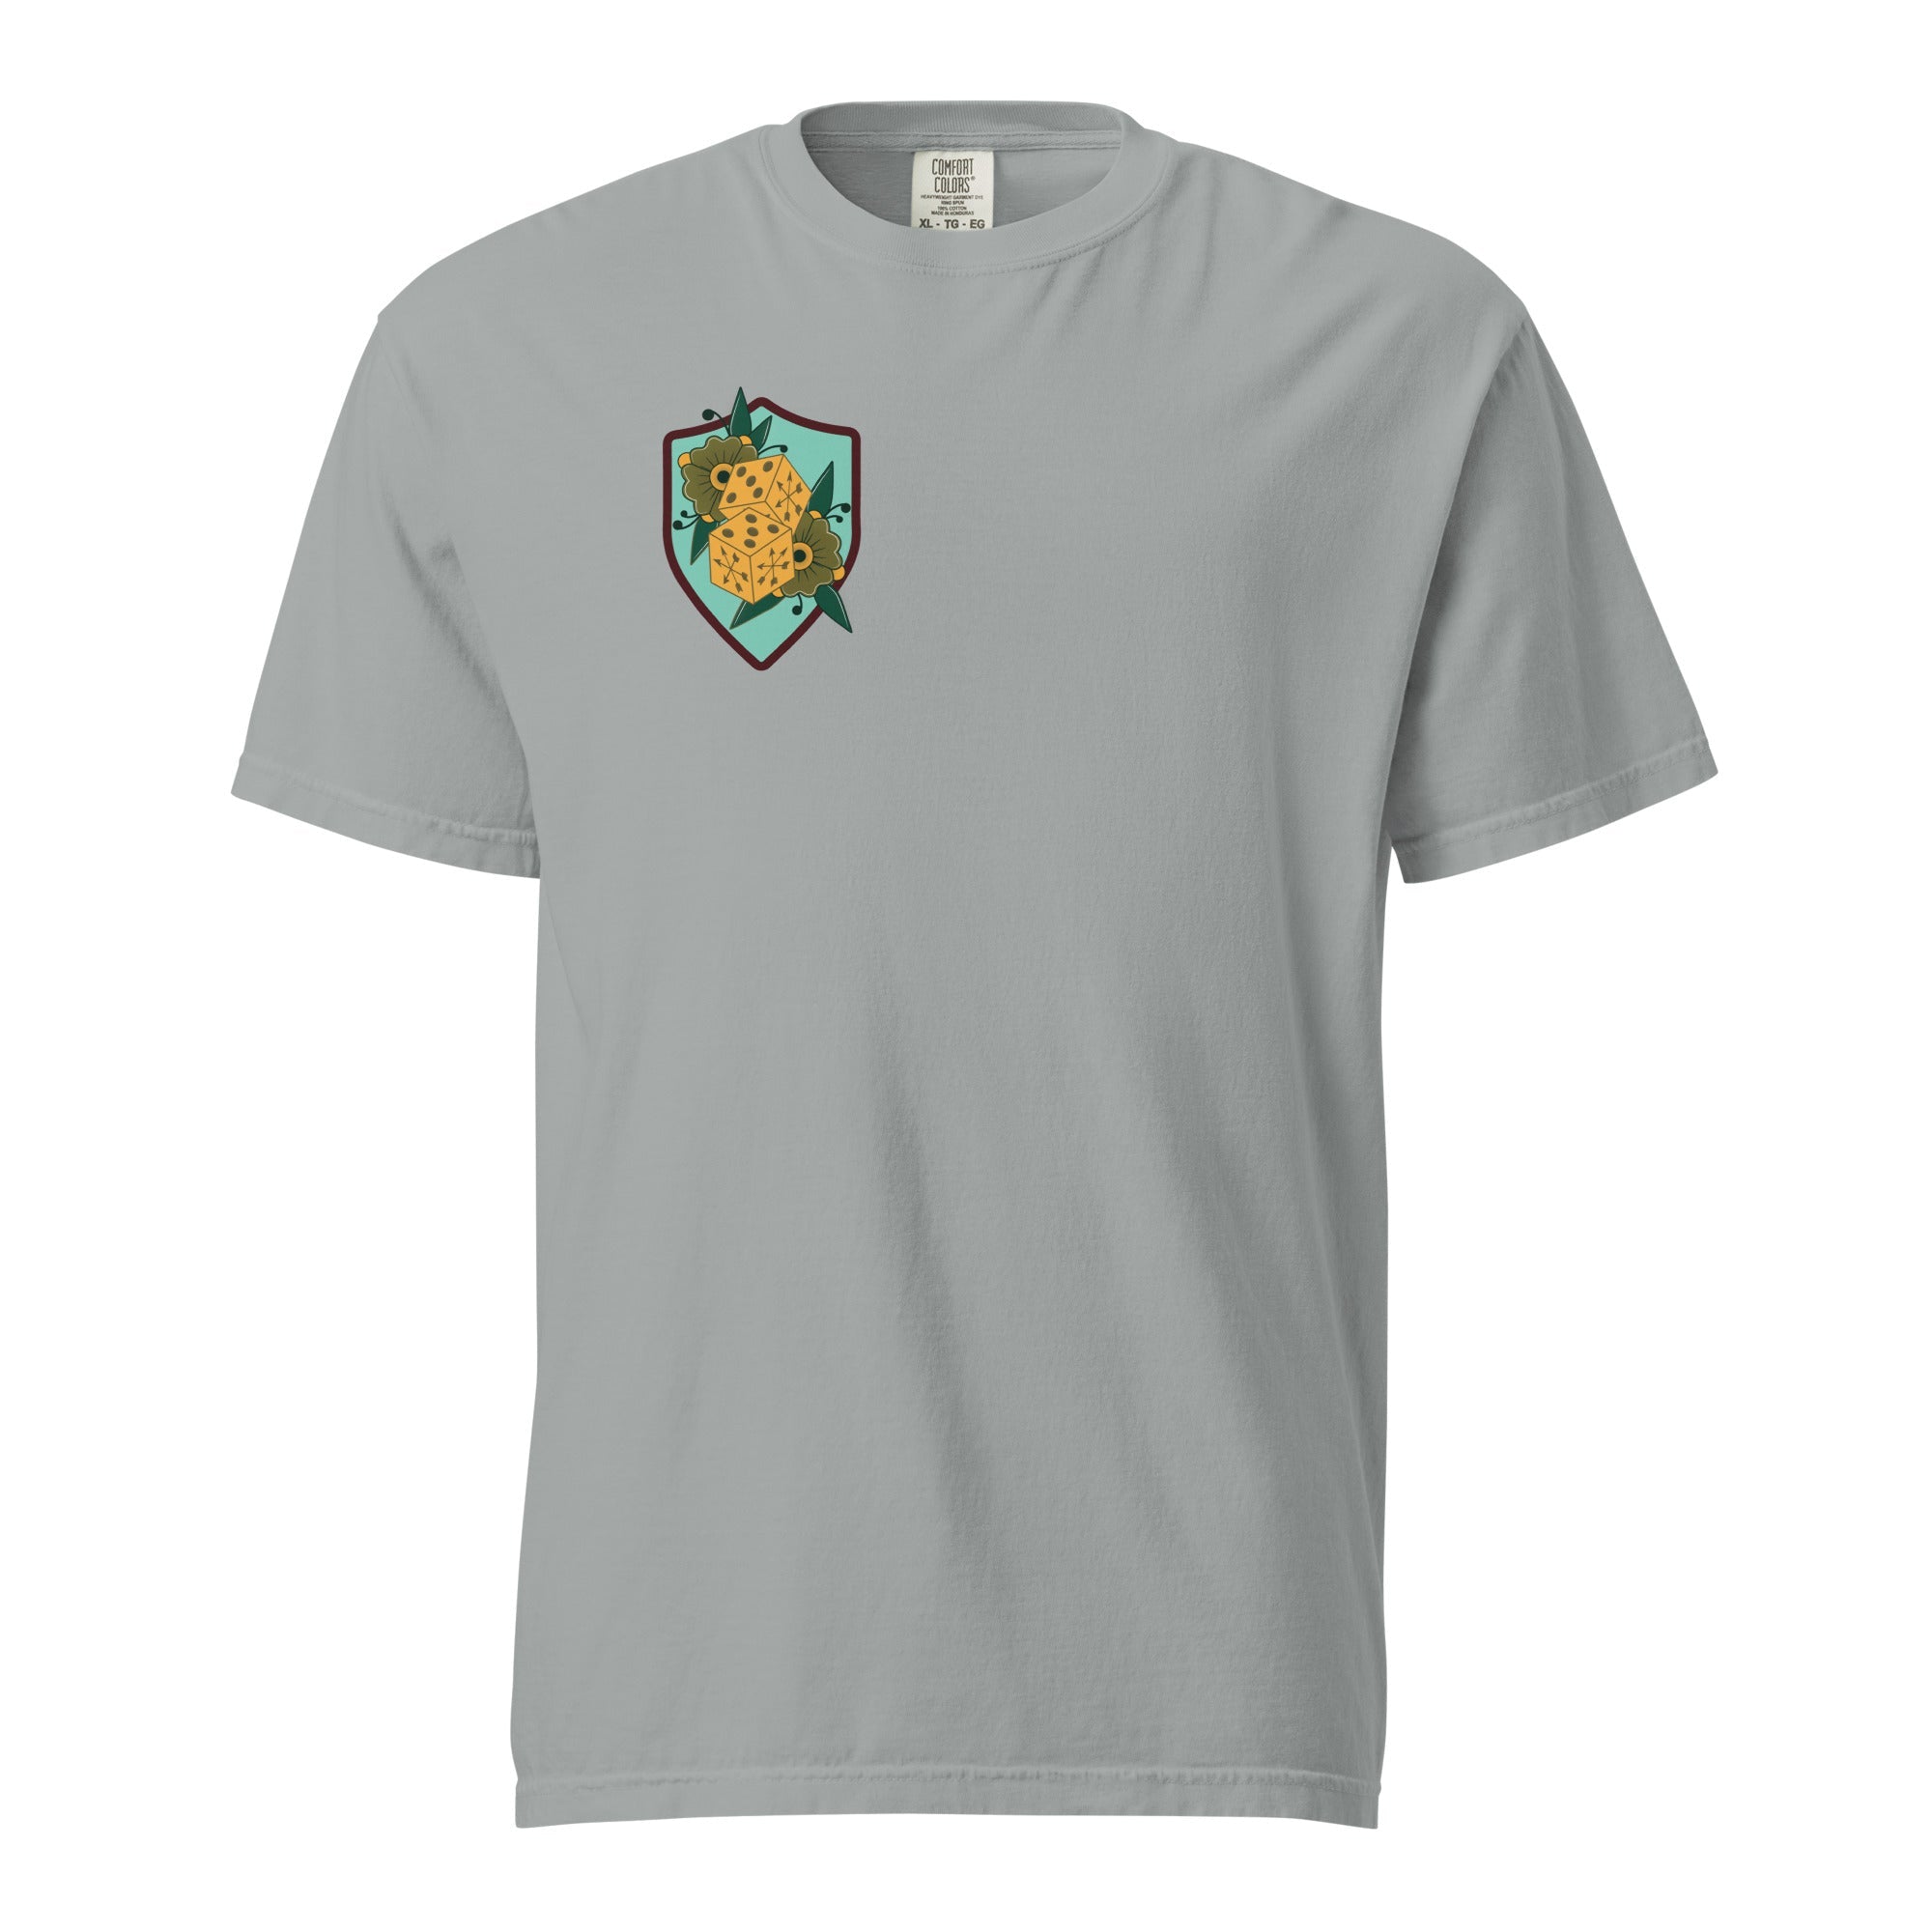 10 Year Anniversary Summer Collection Comfort Colors Tee - Teal - SOARescue